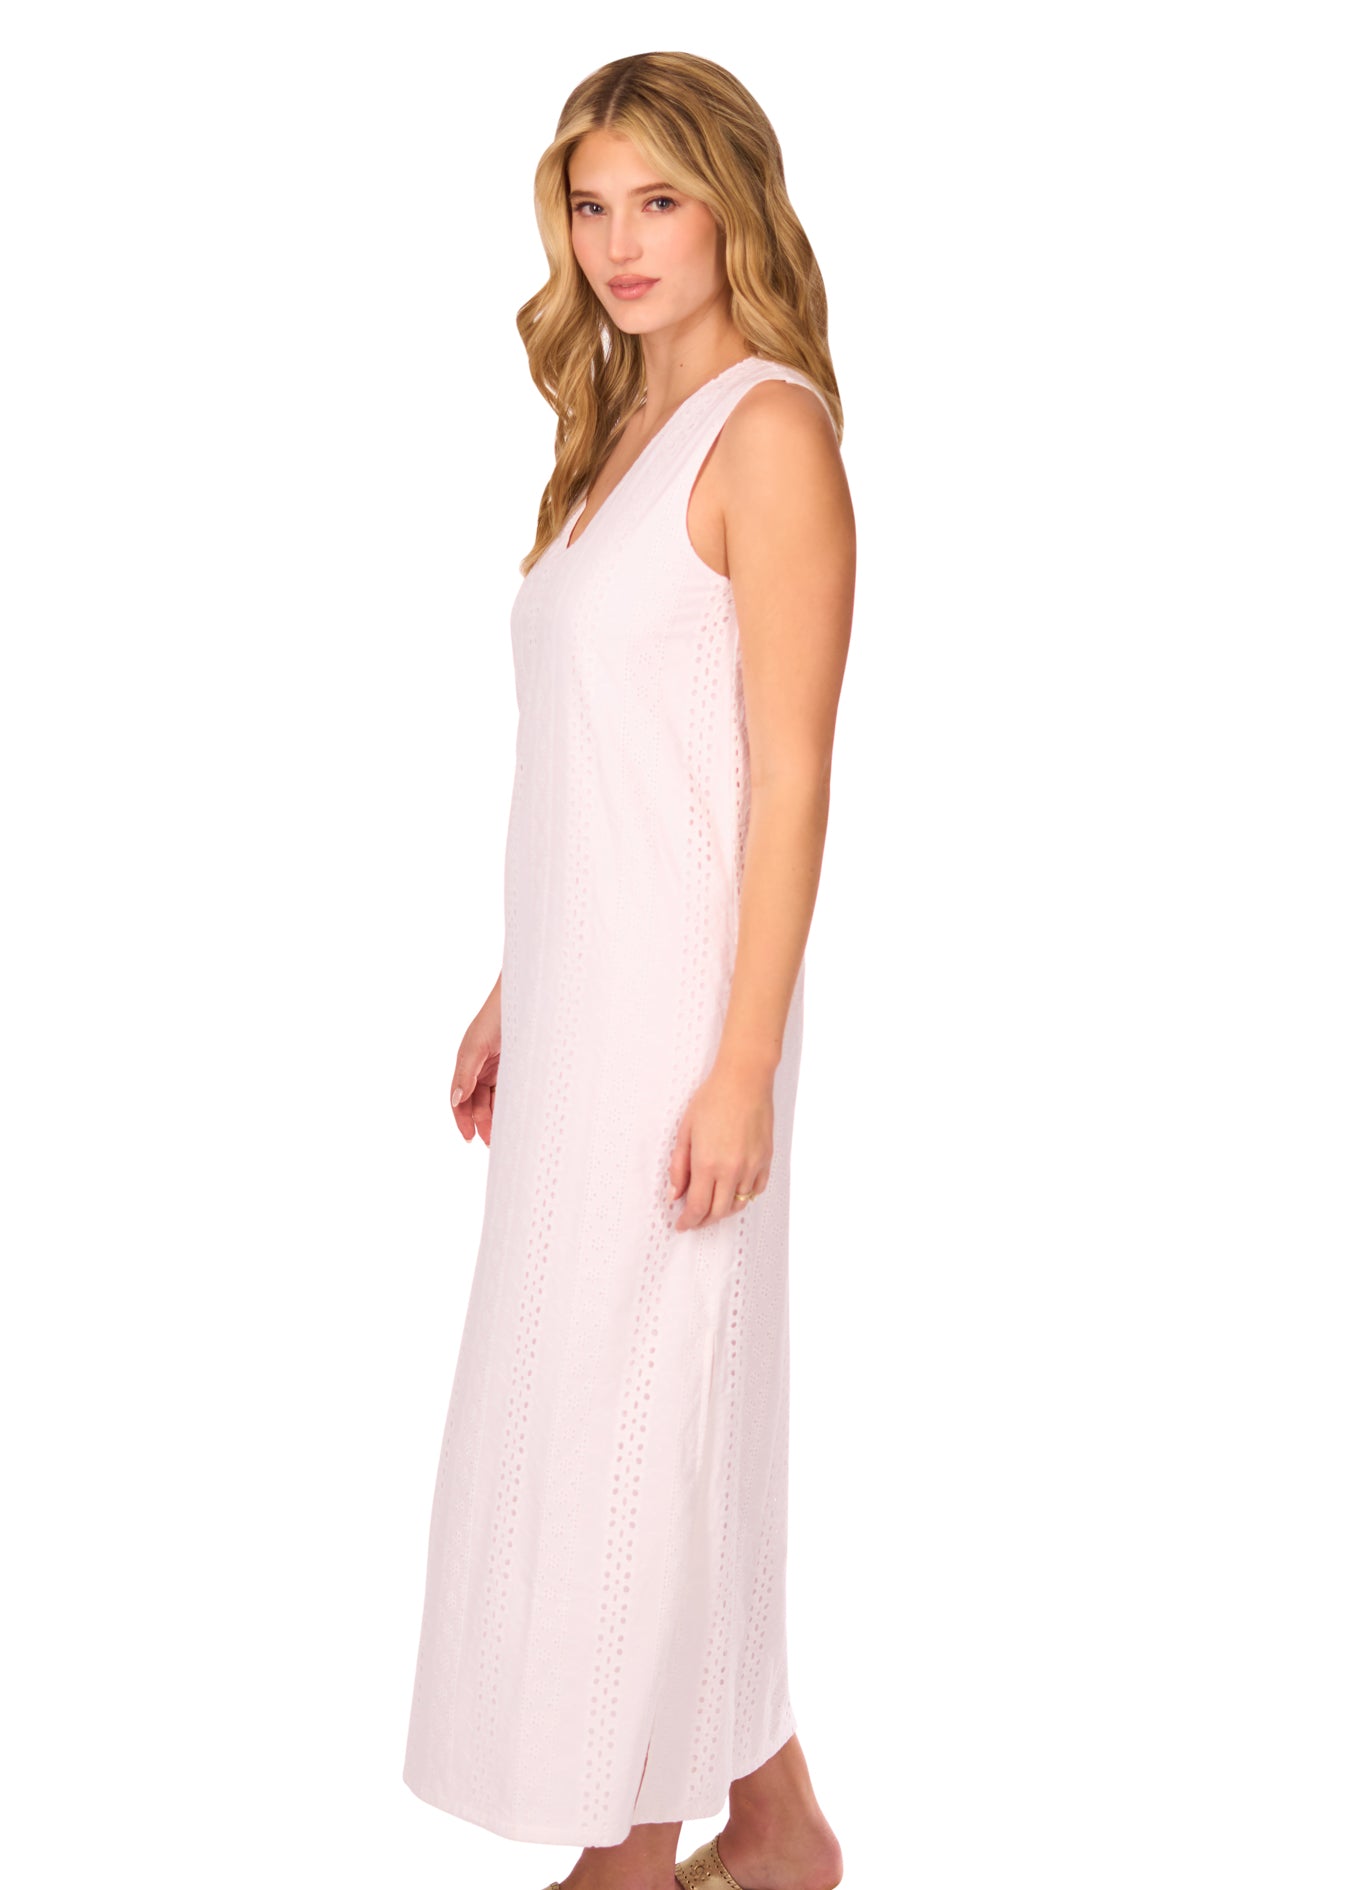 The side of a blonde woman wearing the White Eyelet Side Slit Maxi Dress on a white background.